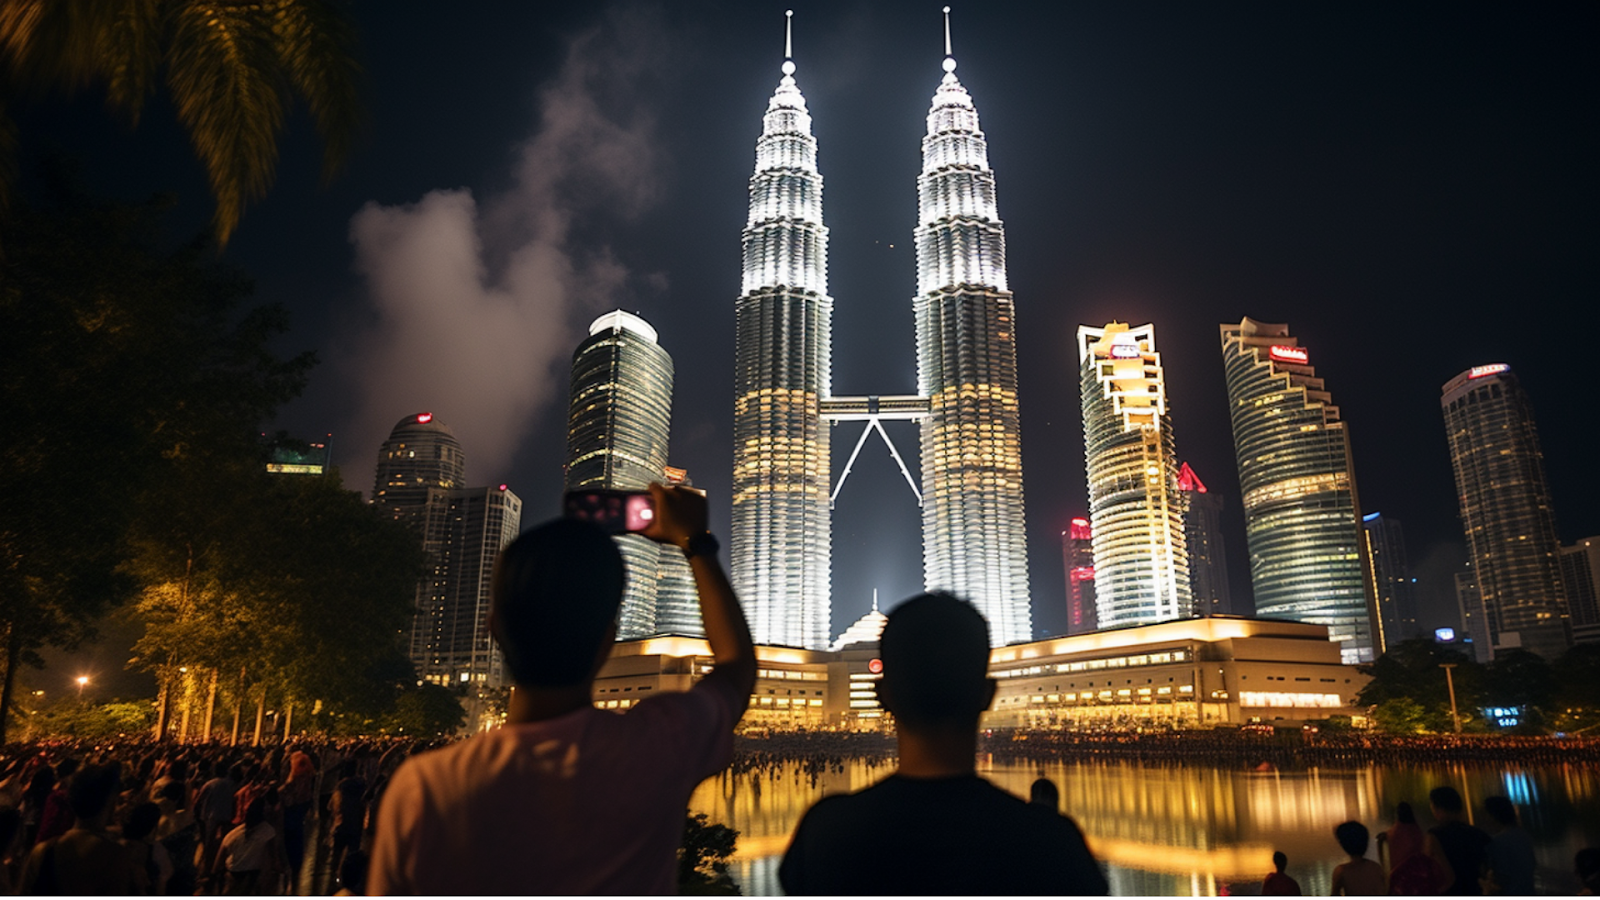 Spectators admire the city lights reflecting off the Petronas Towers at night in Kuala Lumpur, a modern marvel of architectural design.